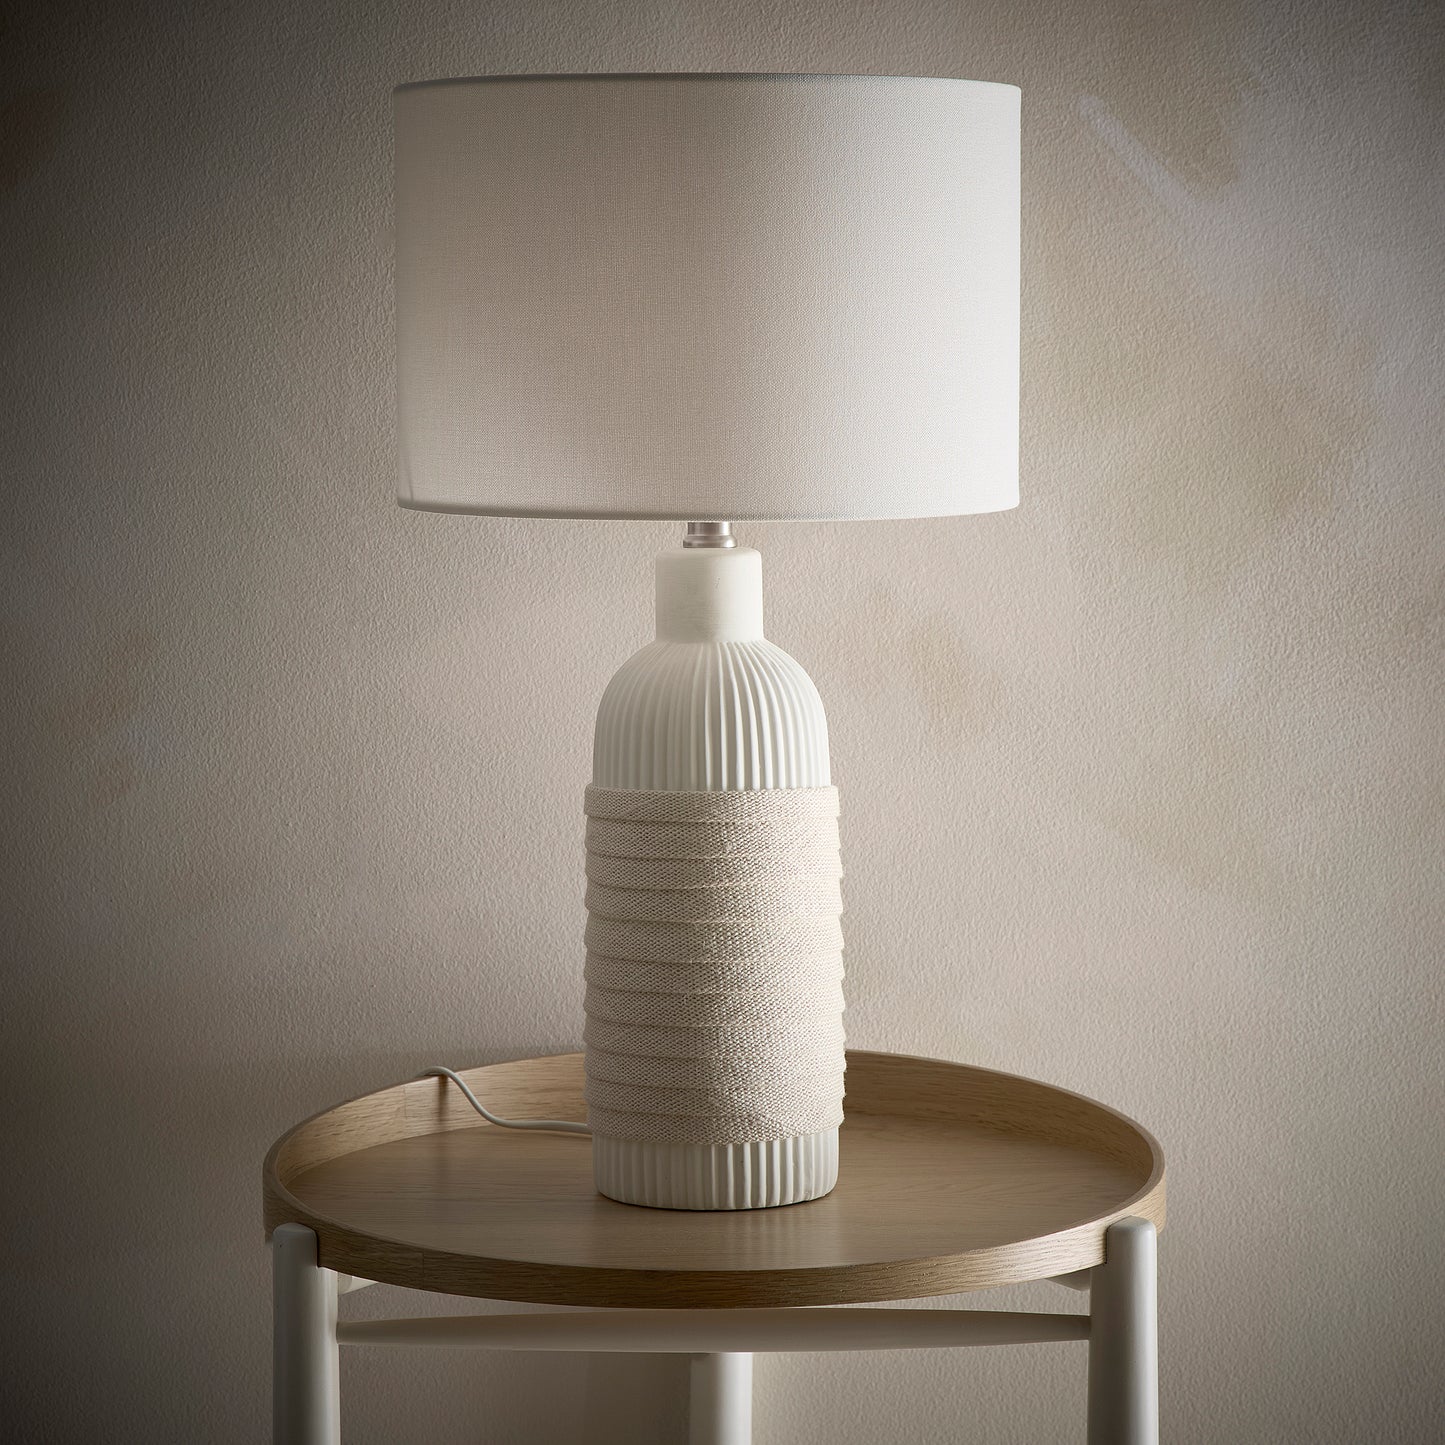 Ceramic Table Lamp in a Light Cream Finish with a Natural Rope design and a Linen Lampshade